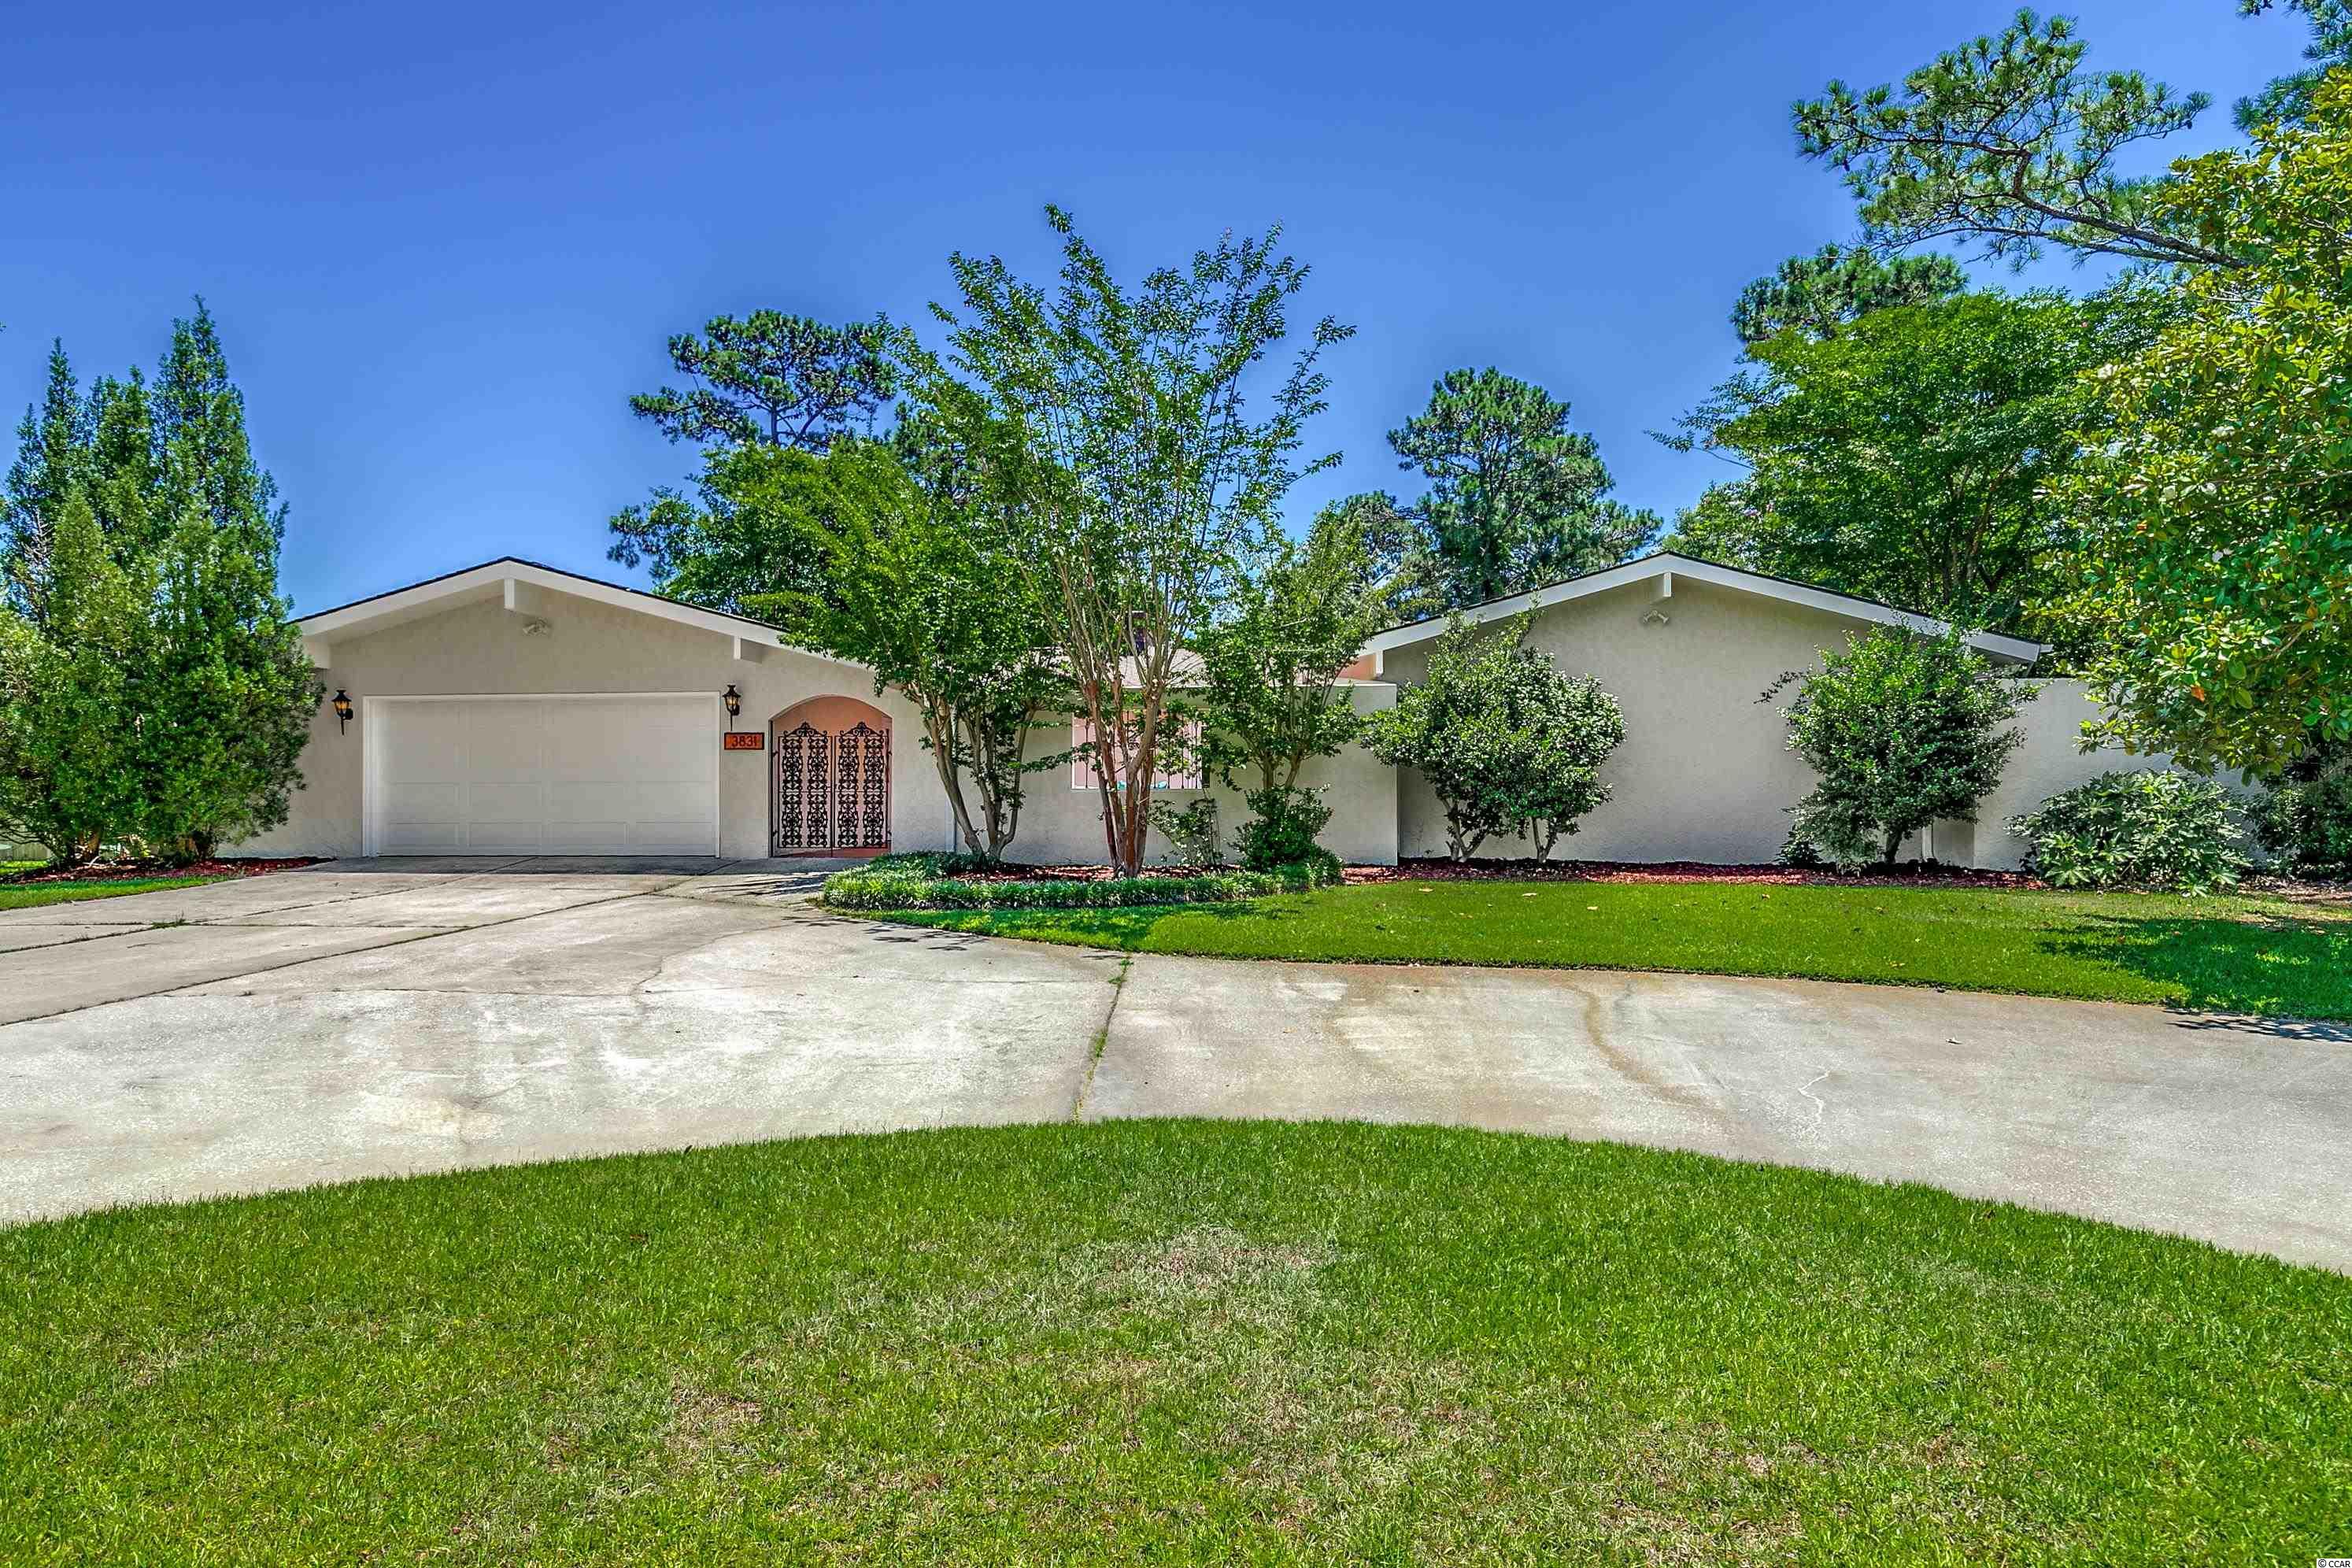 3831 Hobcaw Dr. Myrtle Beach, SC 29577